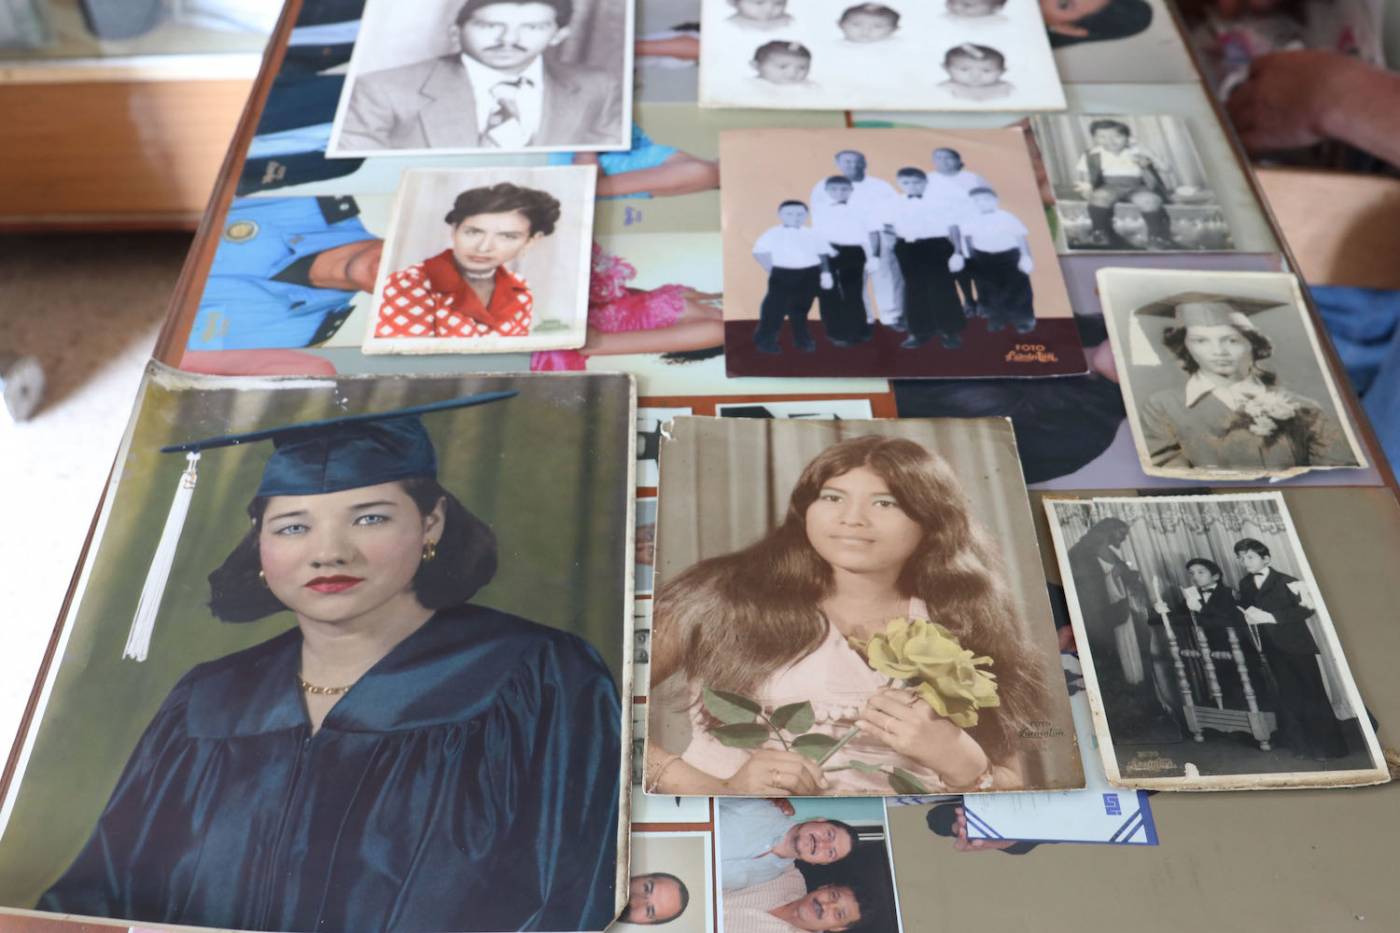 A selection of portrait photos on a table shot from above